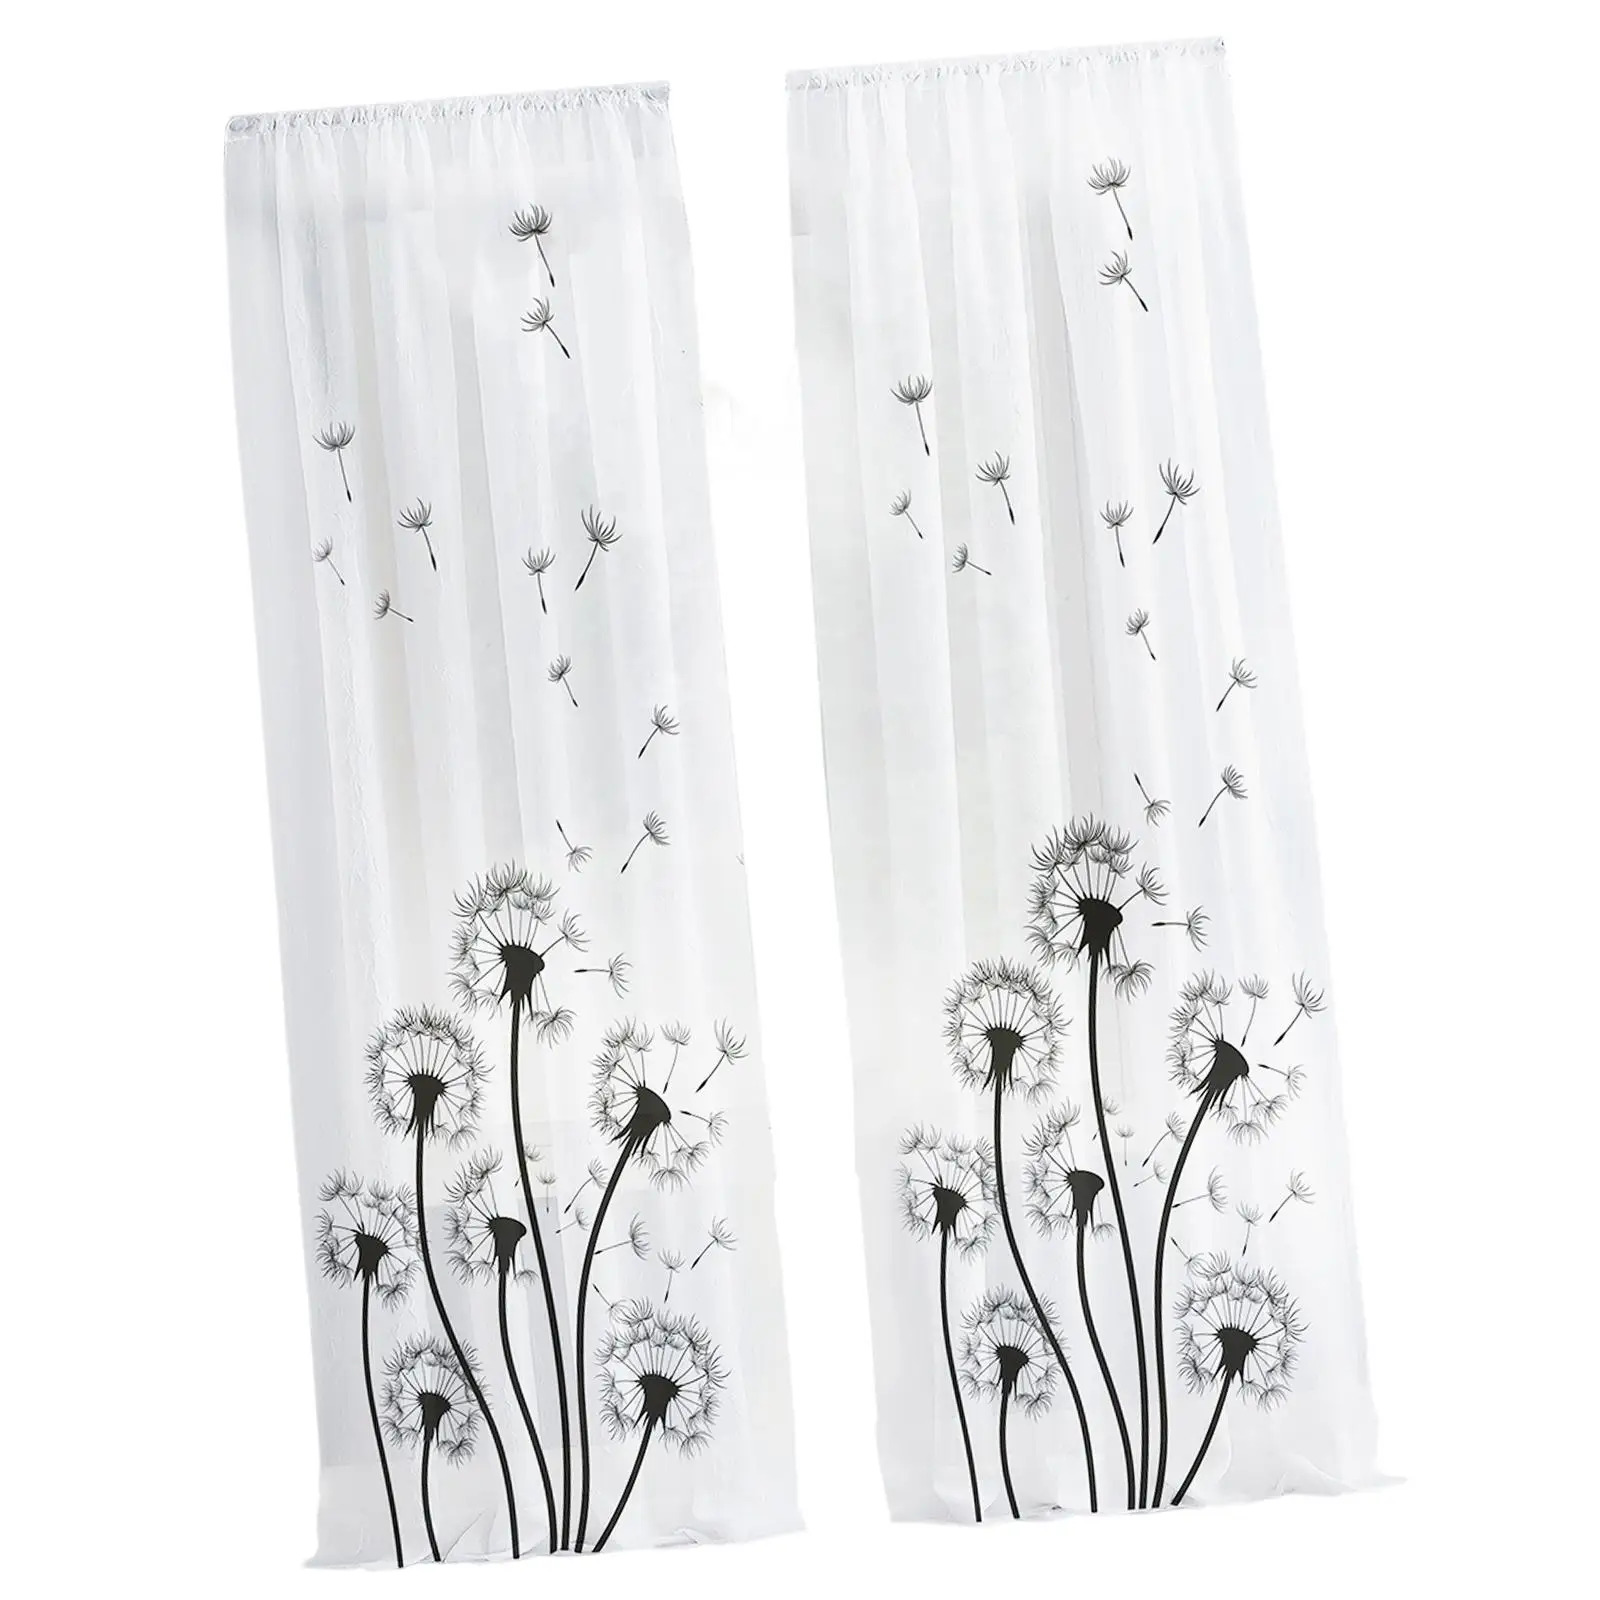 2x Window Tulle Curtains Filtering Window Curtains Decoration Rod Pocket Curtain for Home Window Sliding Glass Door Kitchen